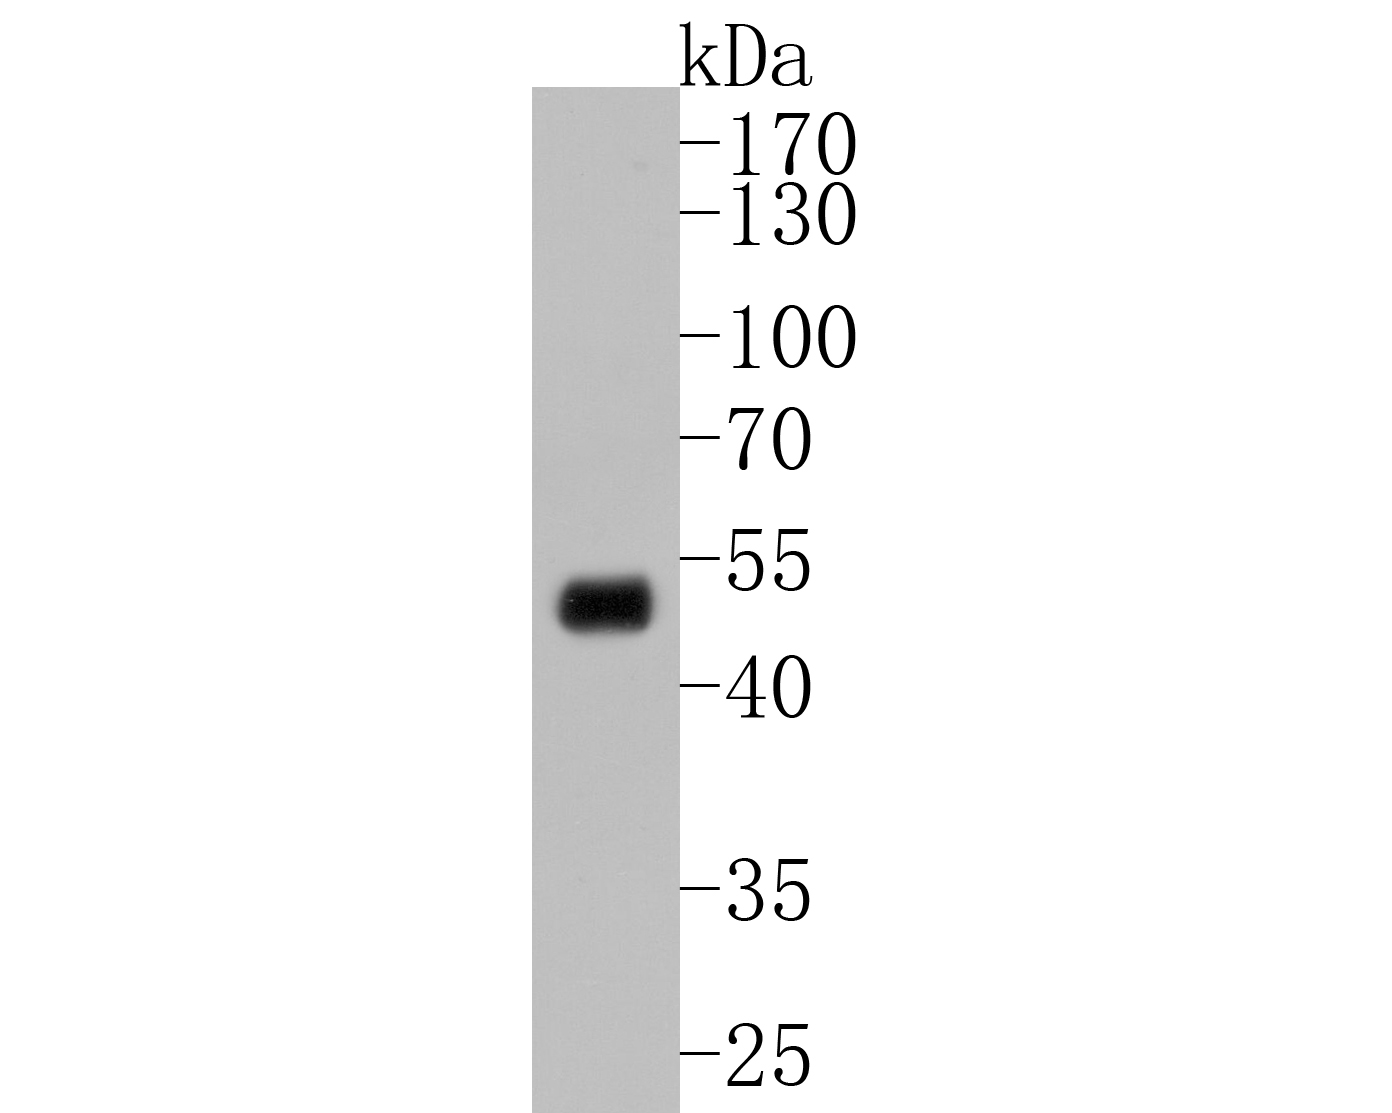 Western blot analysis of MEK5 on Hela cell lysates. Proteins were transferred to a PVDF membrane and blocked with 5% BSA in PBS for 1 hour at room temperature. The primary antibody (ET1612-34, 1/500) was used in 5% BSA at room temperature for 2 hours. Goat Anti-Rabbit IgG - HRP Secondary Antibody (HA1001) at 1:5,000 dilution was used for 1 hour at room temperature.